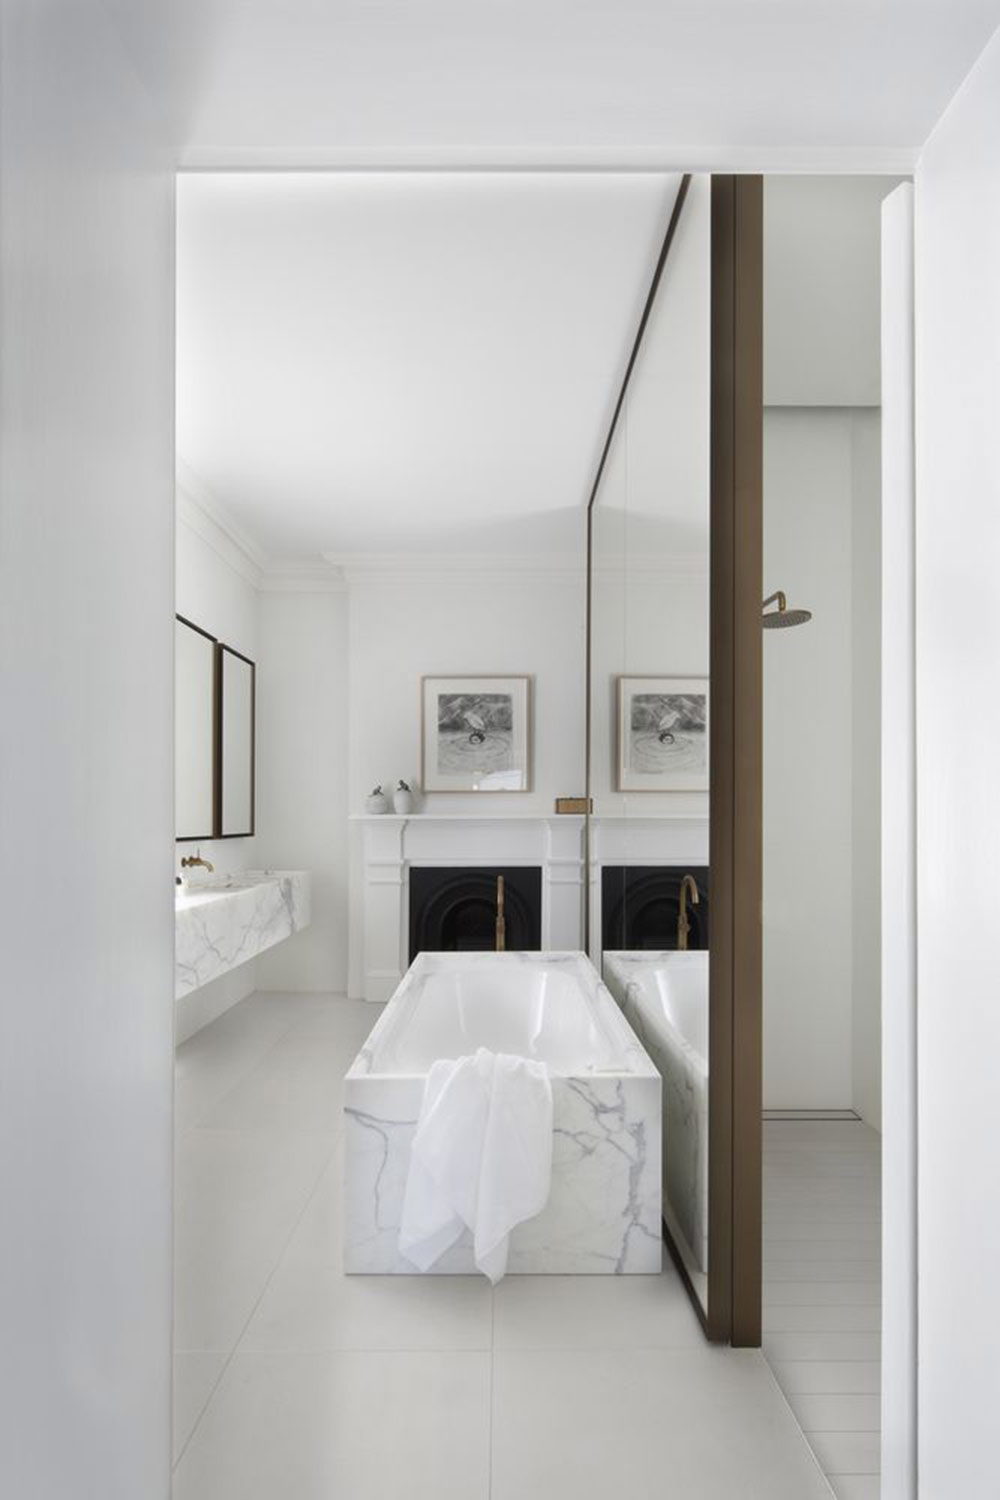 Marble bath with large mirrored dividing wall